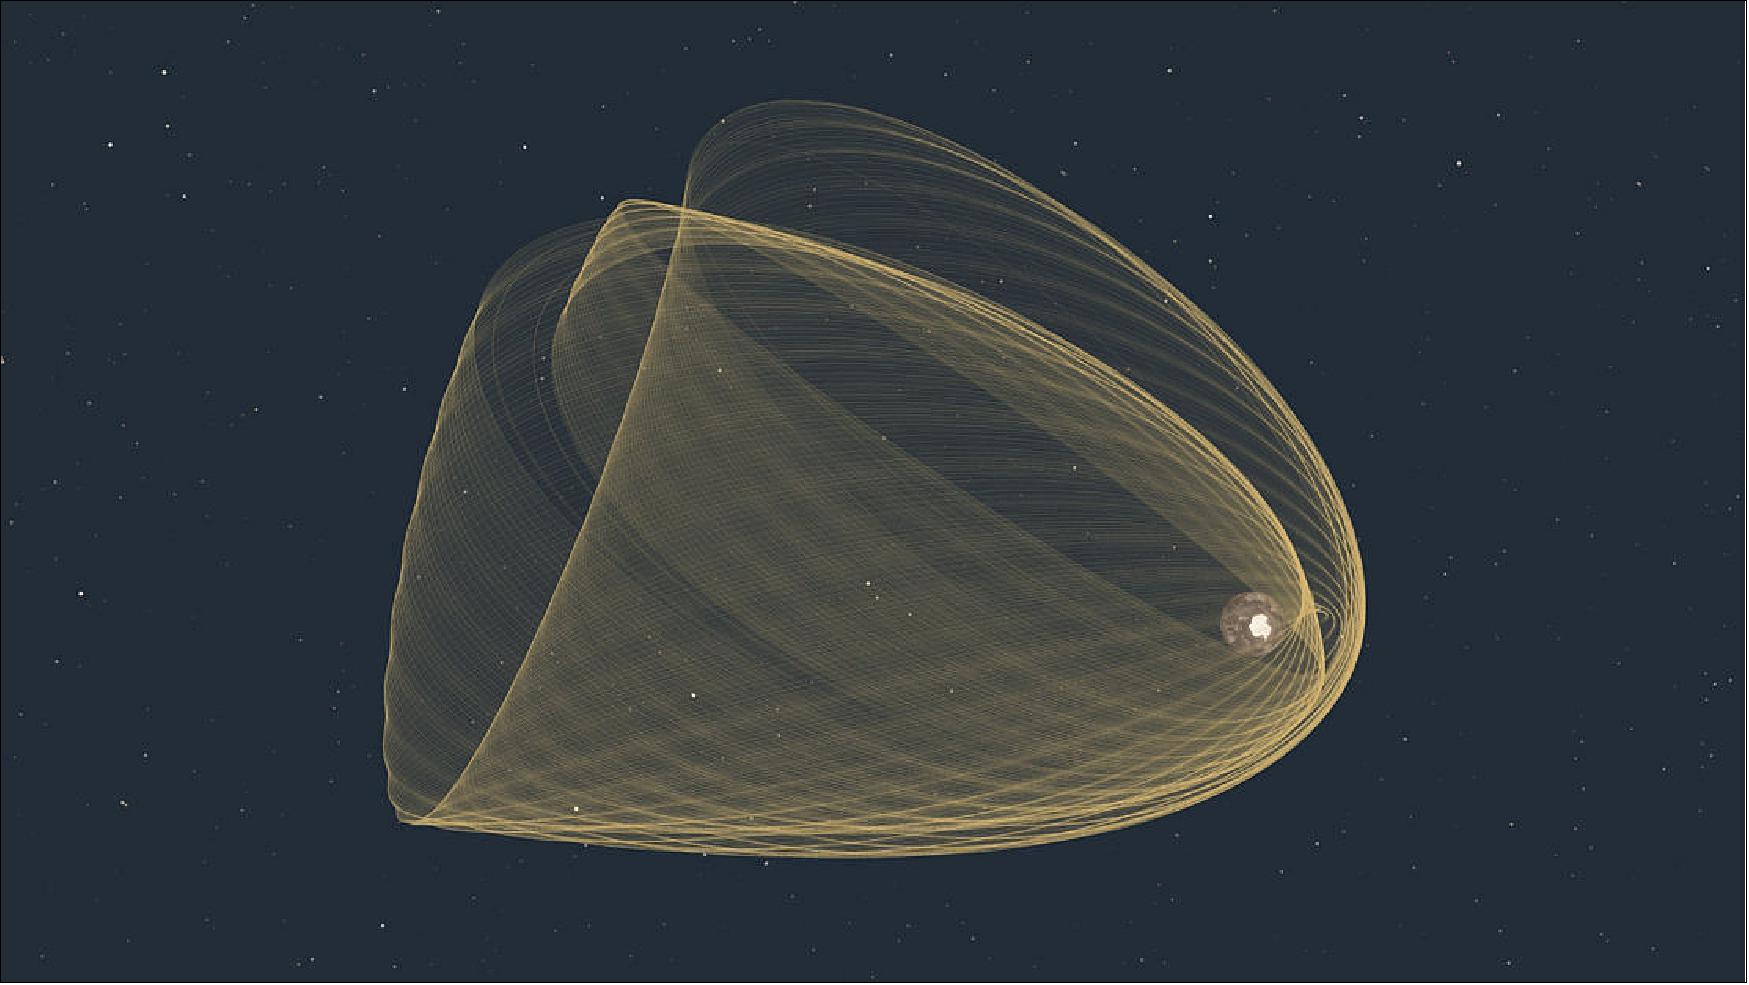 Figure 26: This image visualises the orbits of the spacecraft since its launch on 17 October 2002, until October of 2017 (image credit: ESA/ScienceOffice.org, CC BY-SA 3.0 IGO) 22)